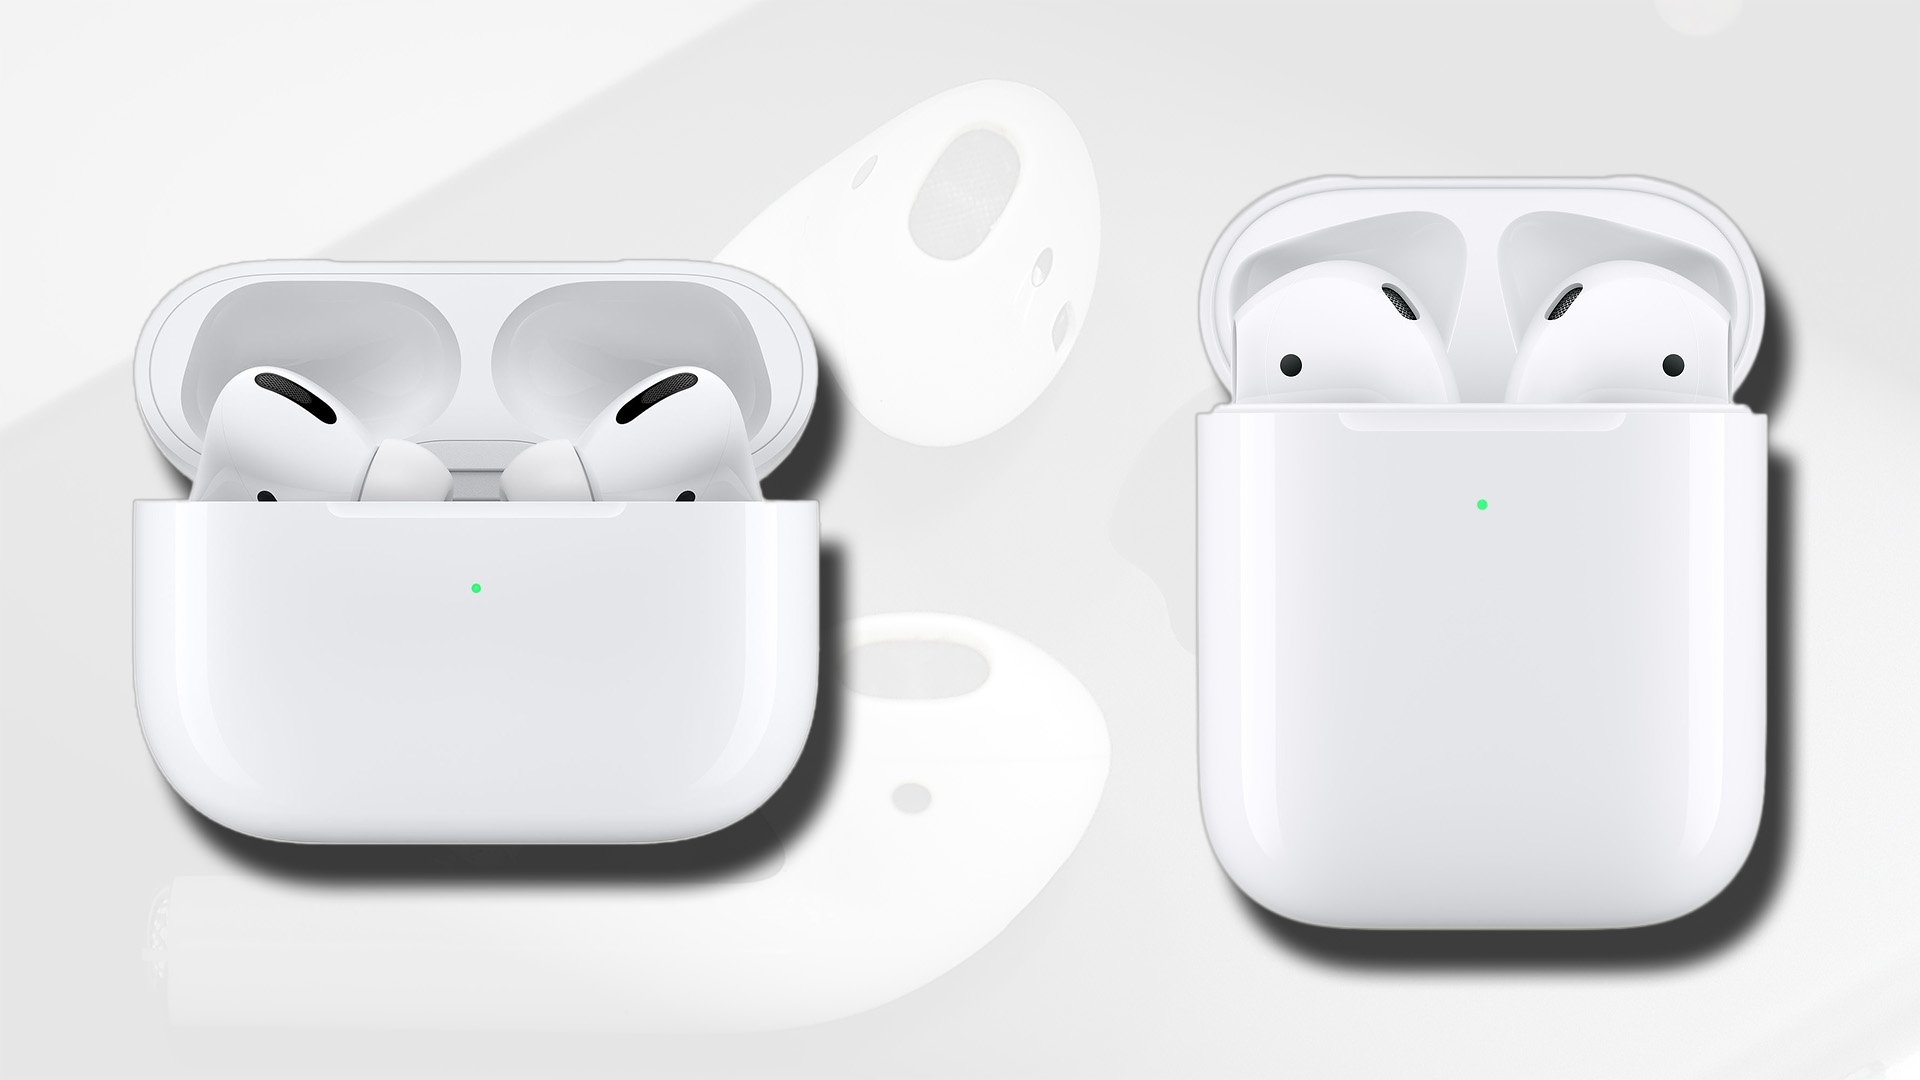 Apple Airpods Pro Vs Airpods 2, In Case You Were Confused About Which